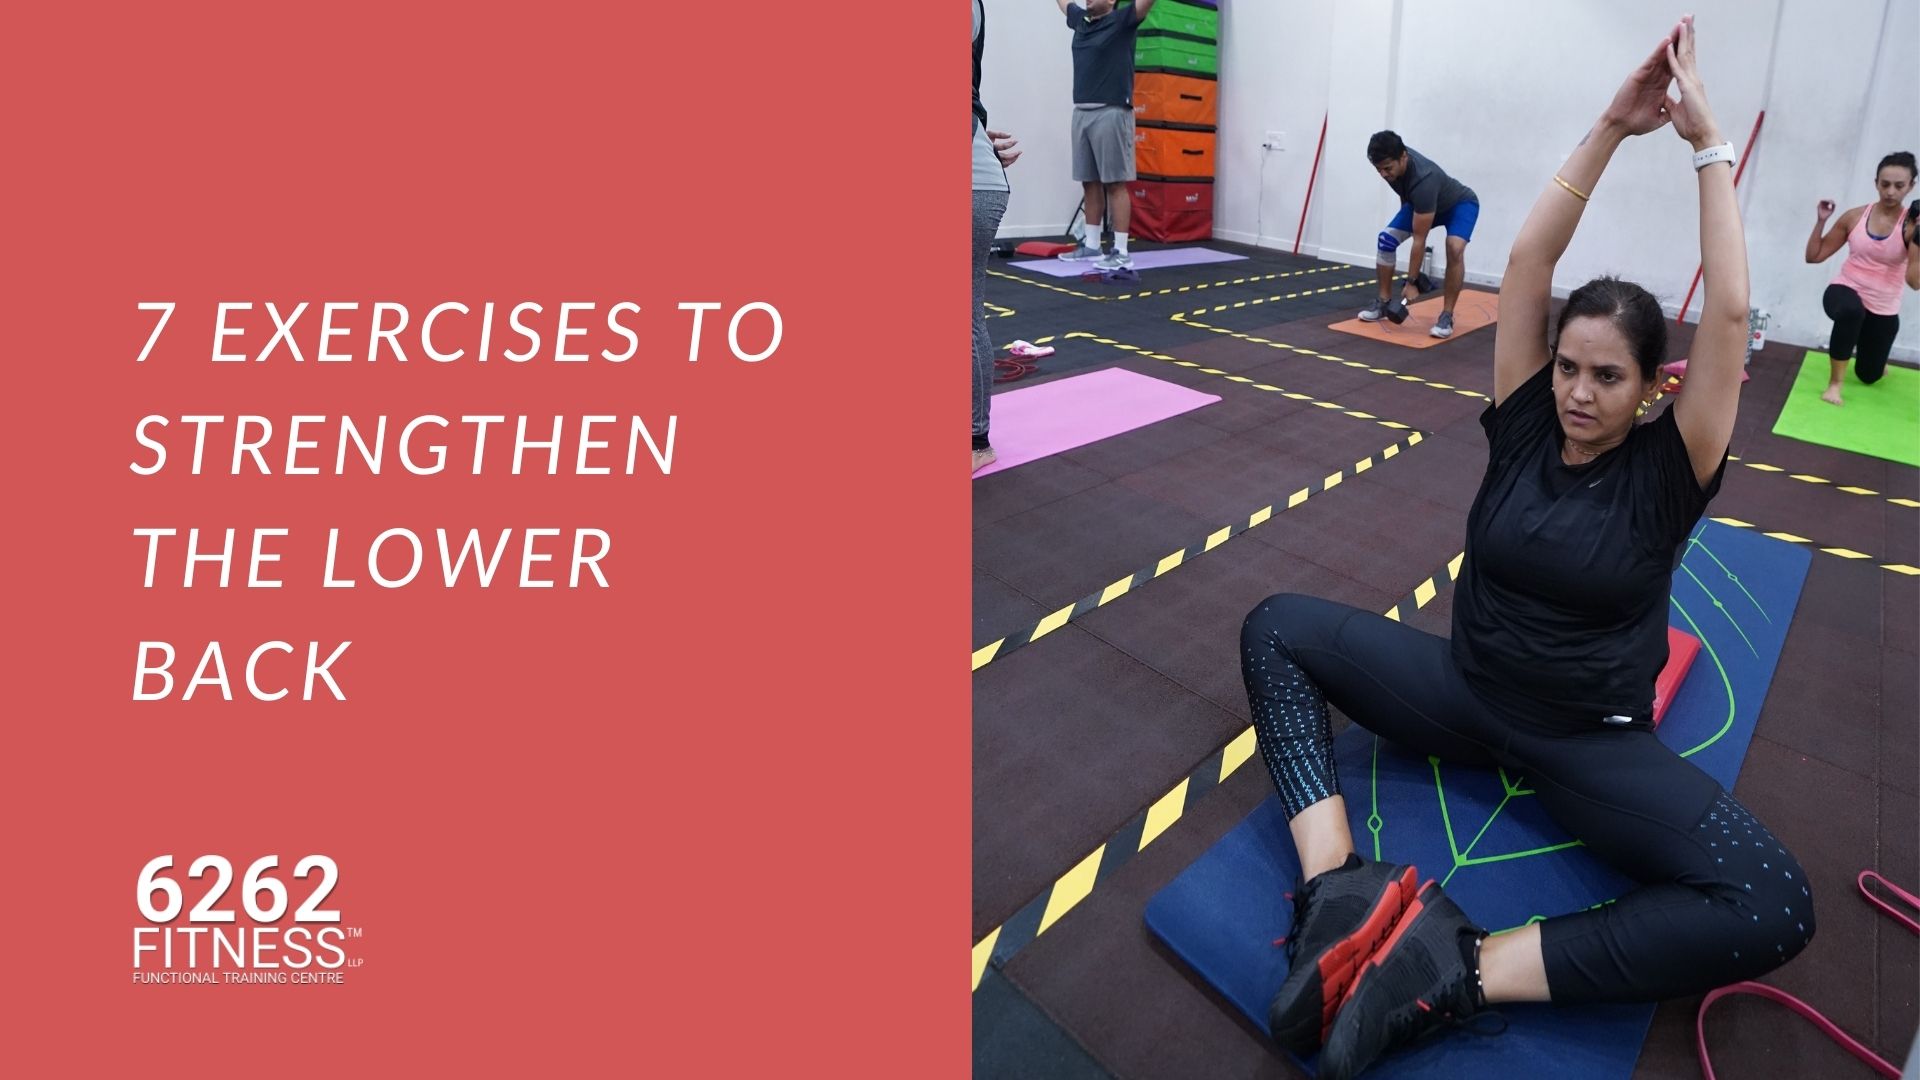 7 exercises to strengthen the lower back